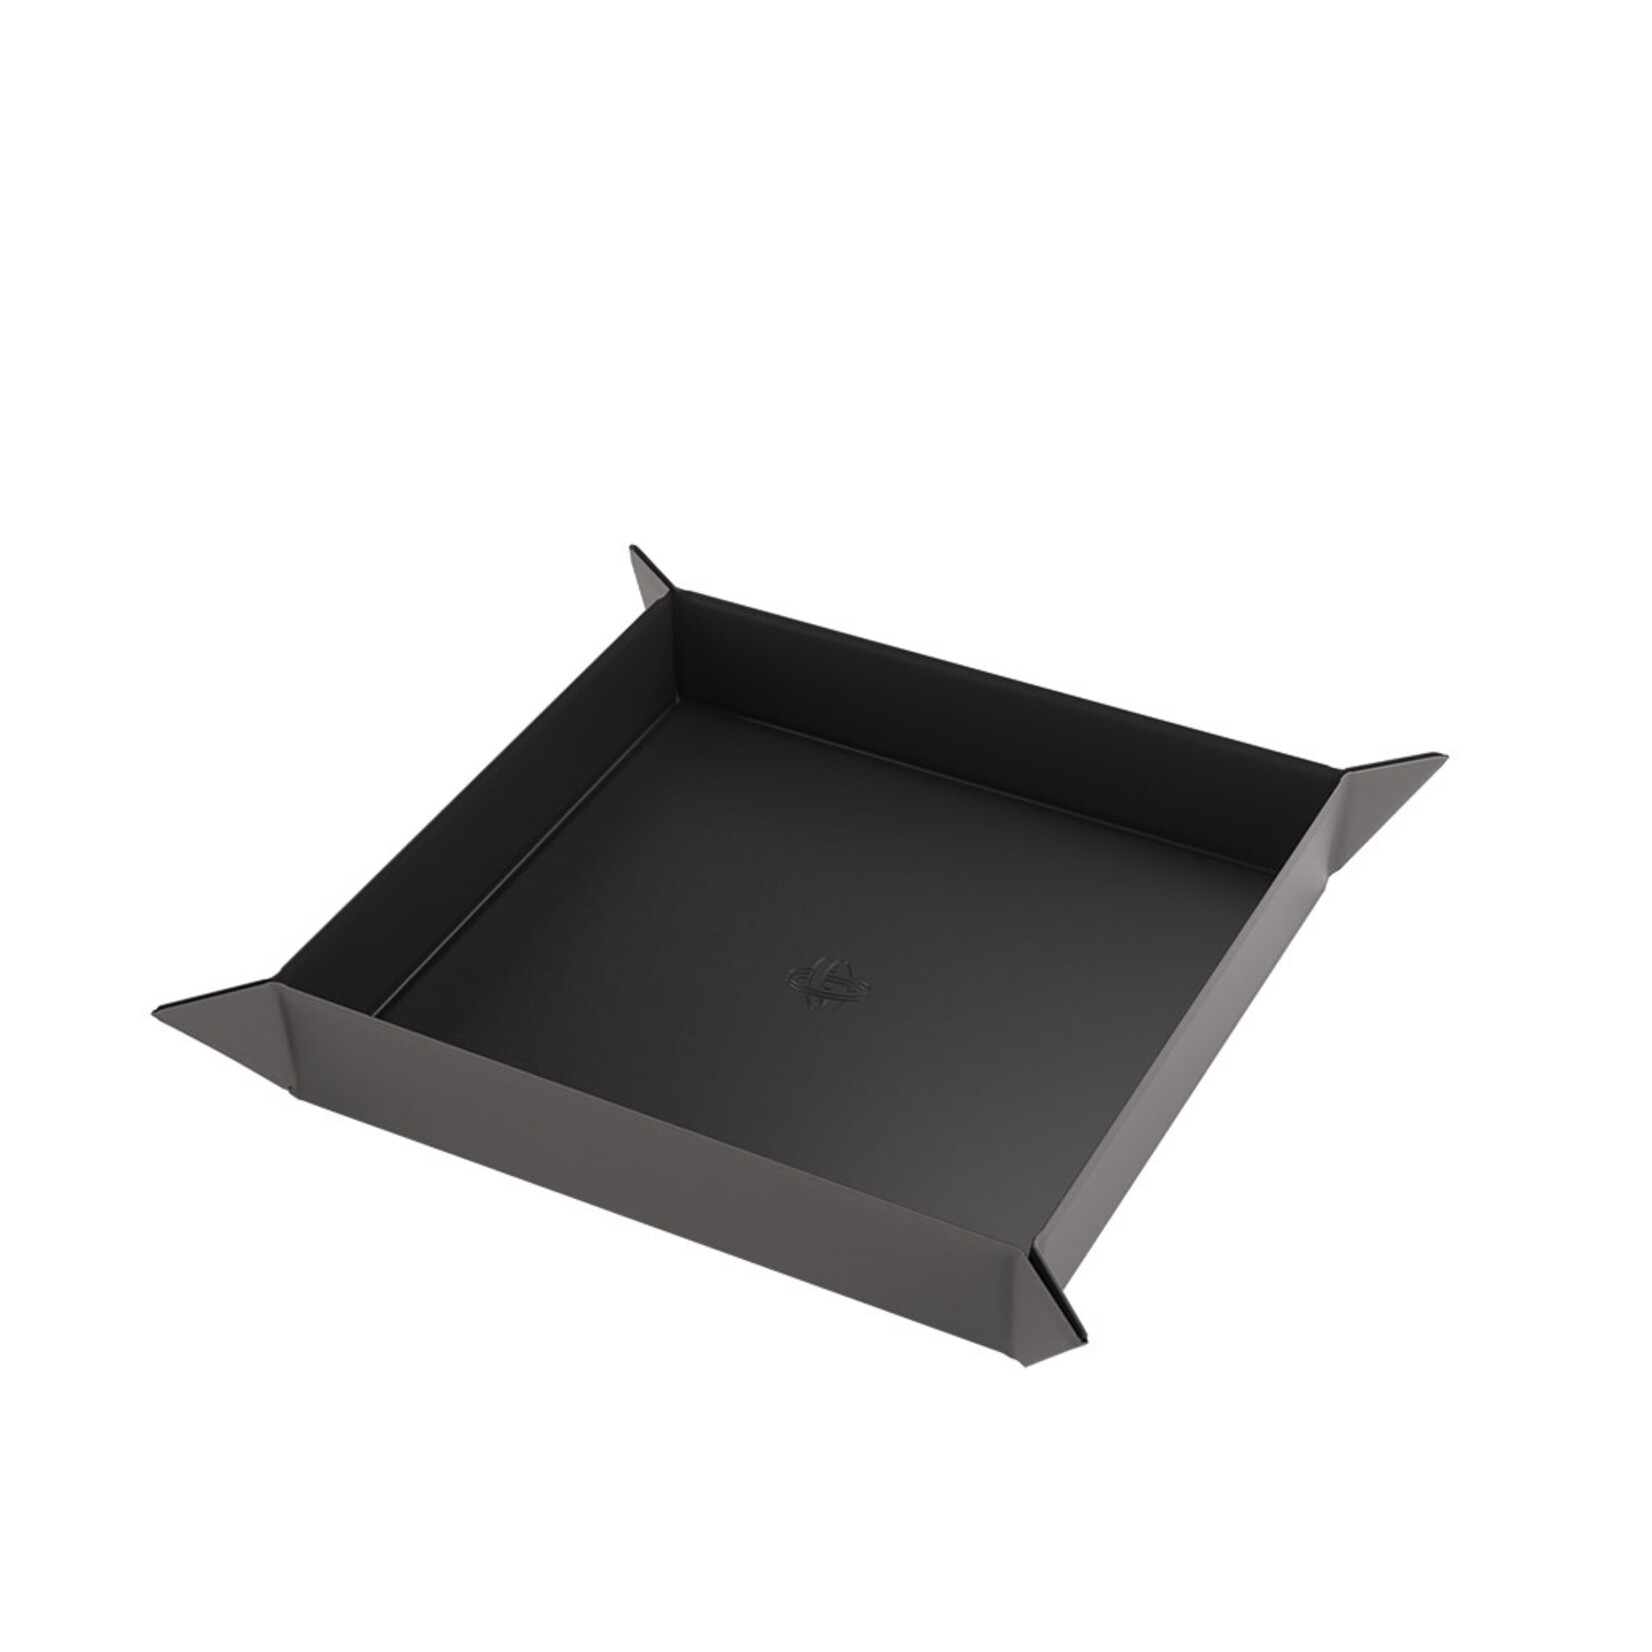 Magnetic Dice Tray Black/Grey Gamegenic